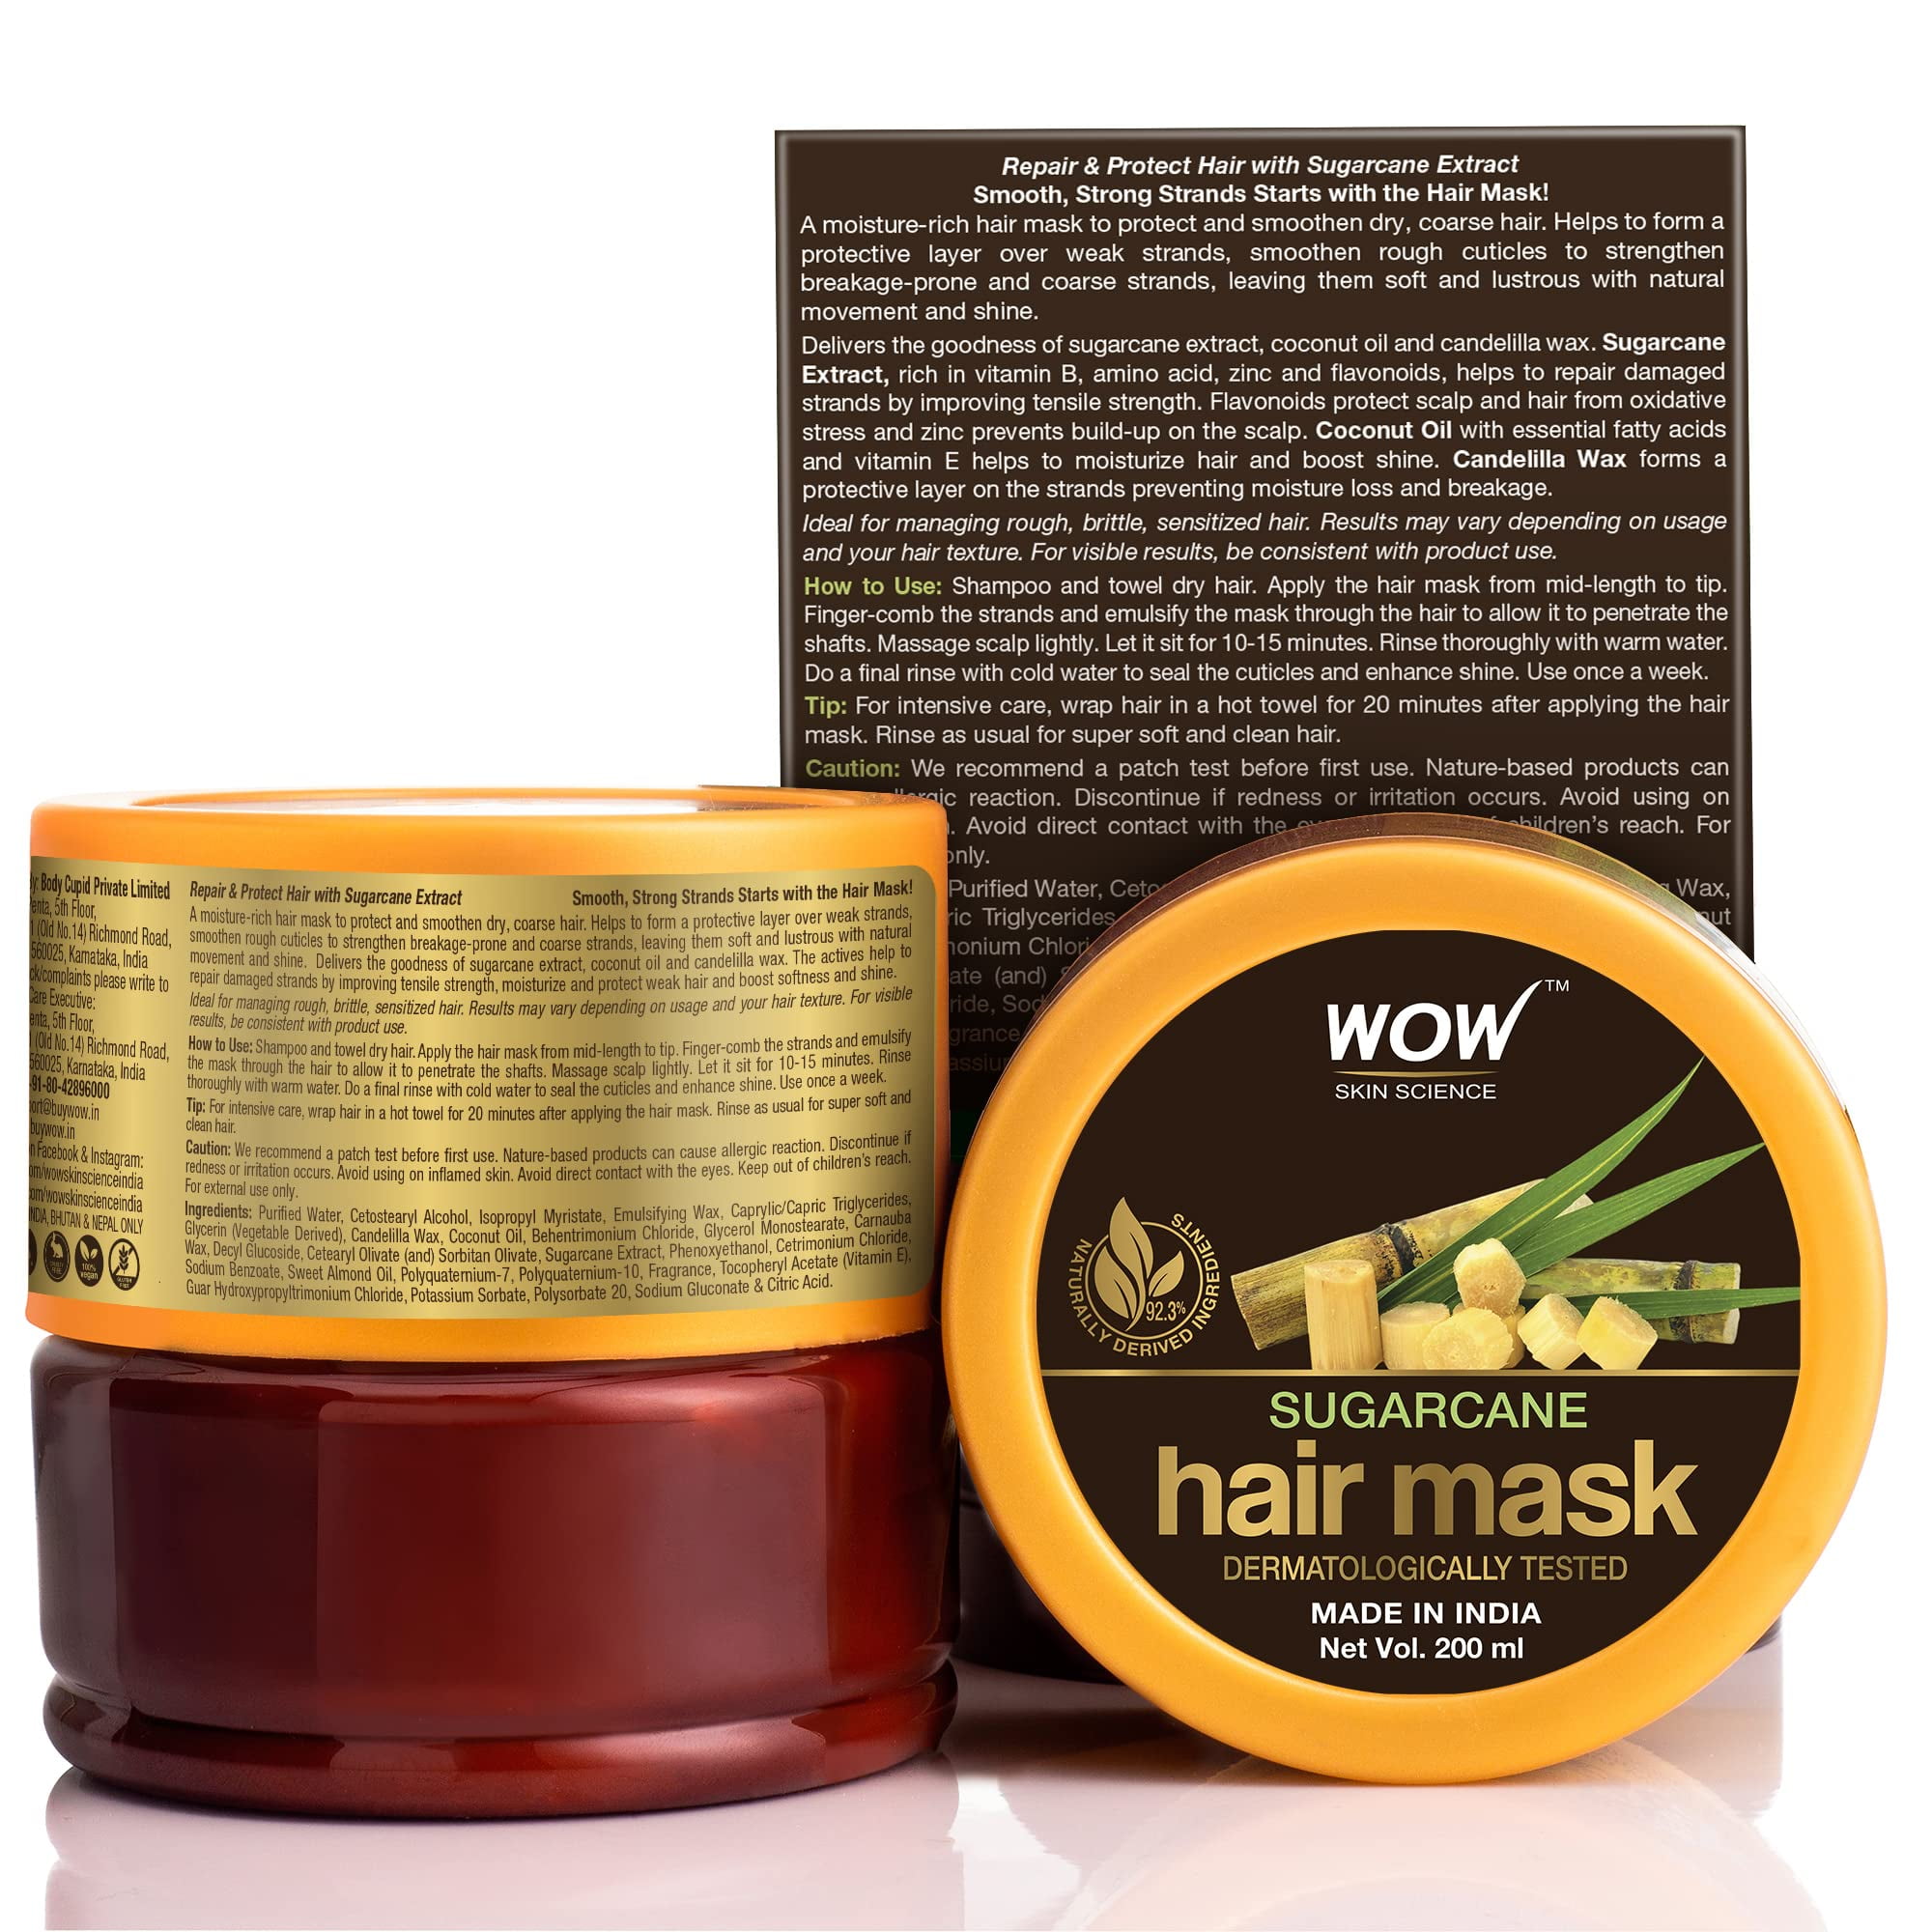 WOW Skin Science Sugarcane Hair Mask For Dry, Frizzy and Damaged Hair - 200  ml 